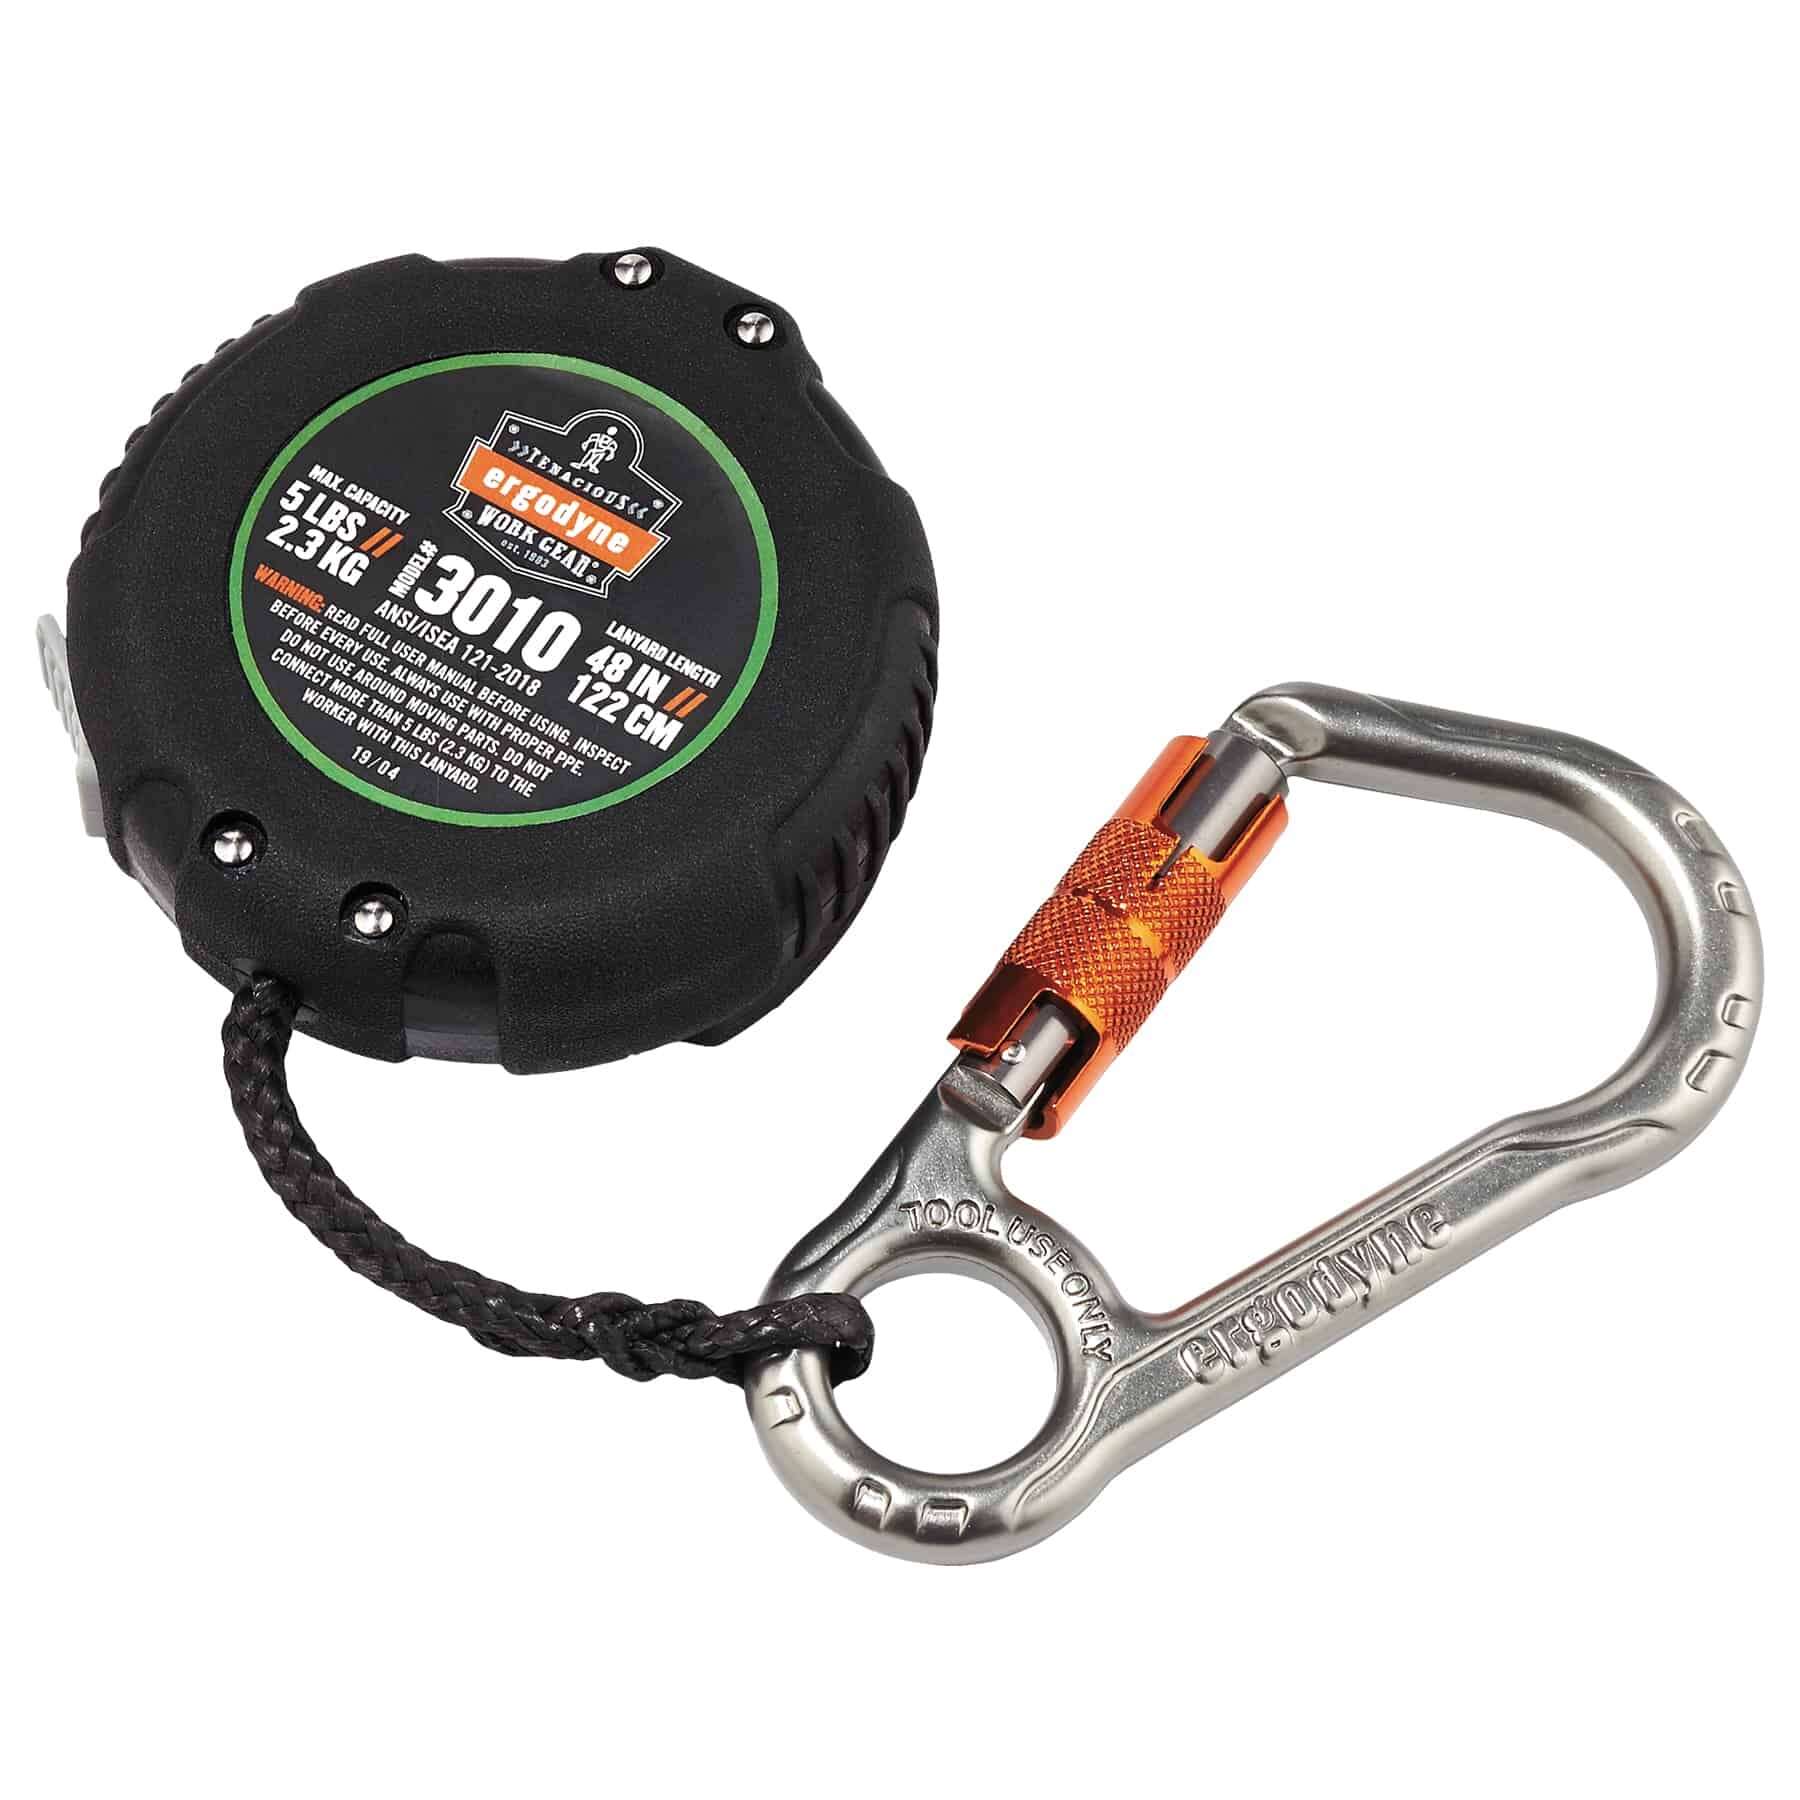 Sabpolo Heavy Duty Lanyard 300&500mm / Electric Fishing Reel Safety Belt /  Stainlesss Steel Wire & CNC Snap / Saltwater